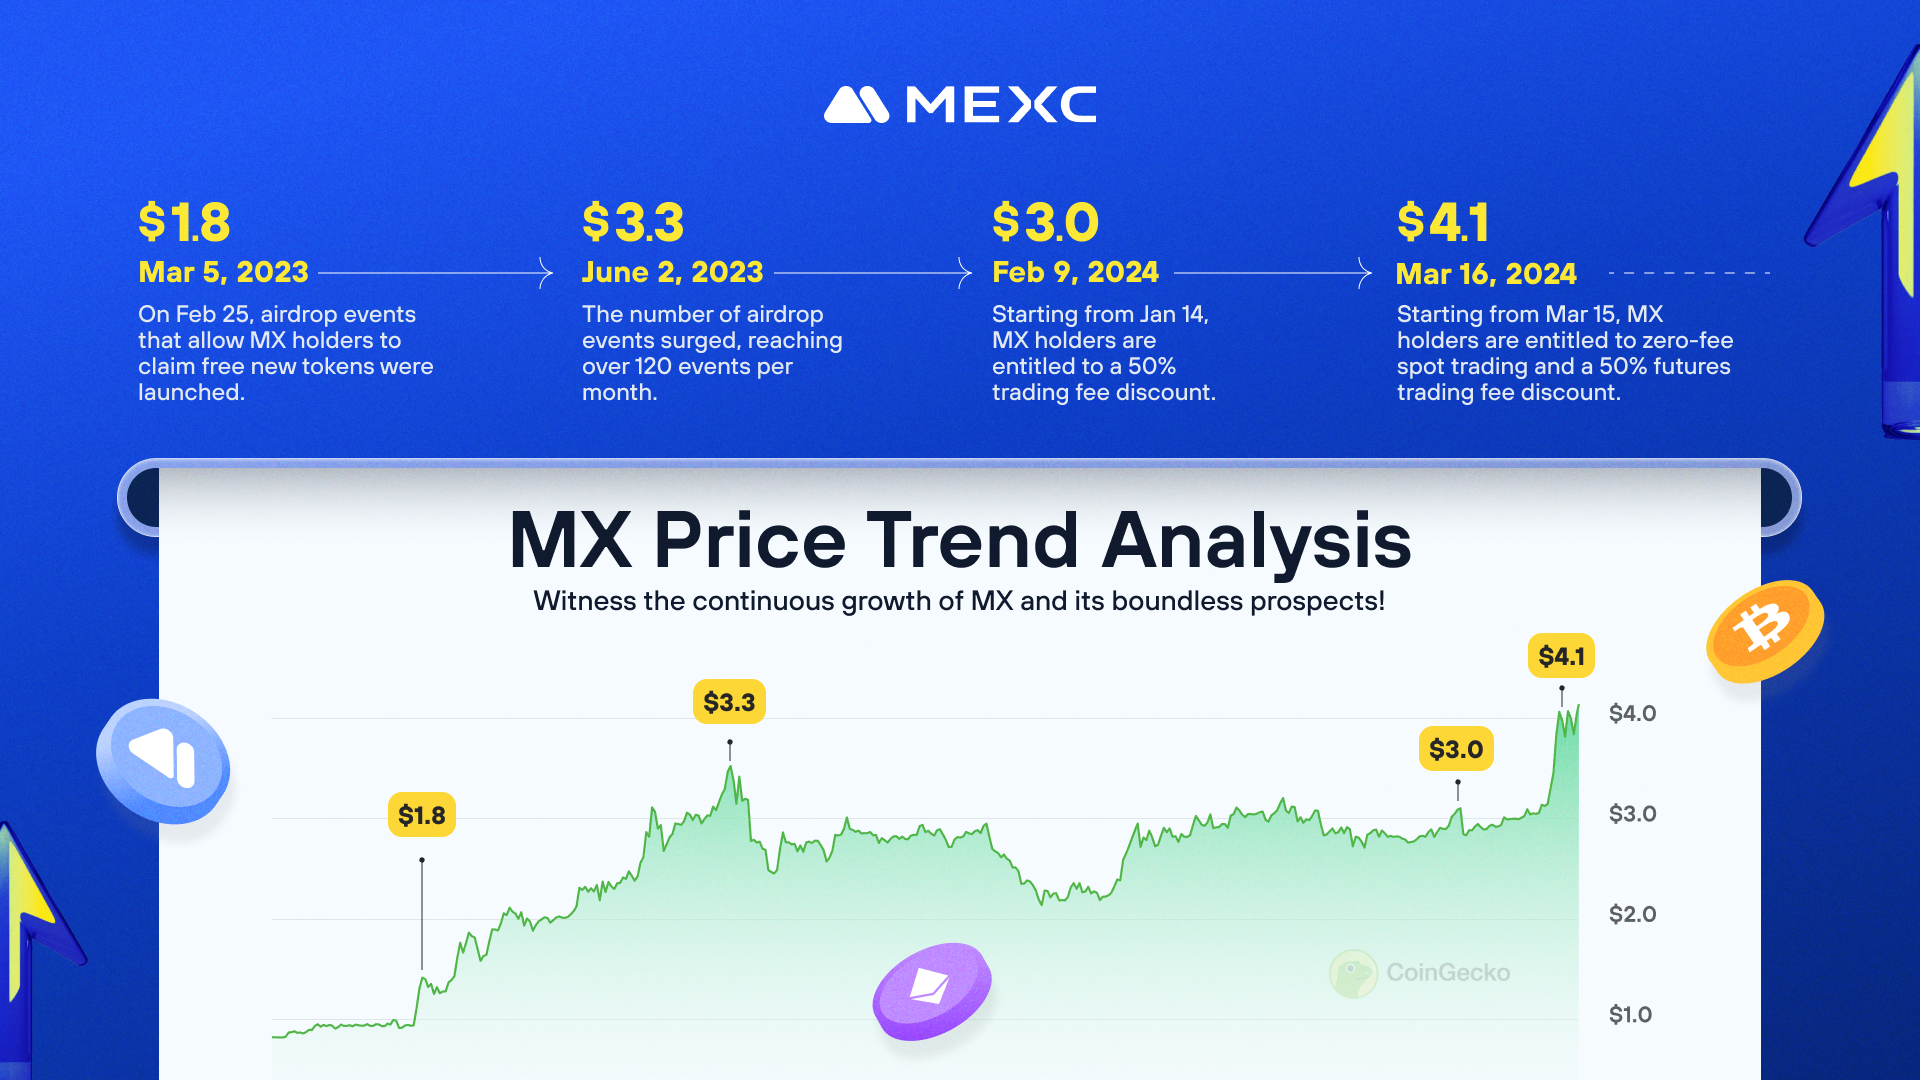 Why Are MX Tokens Increasingly Valuable?